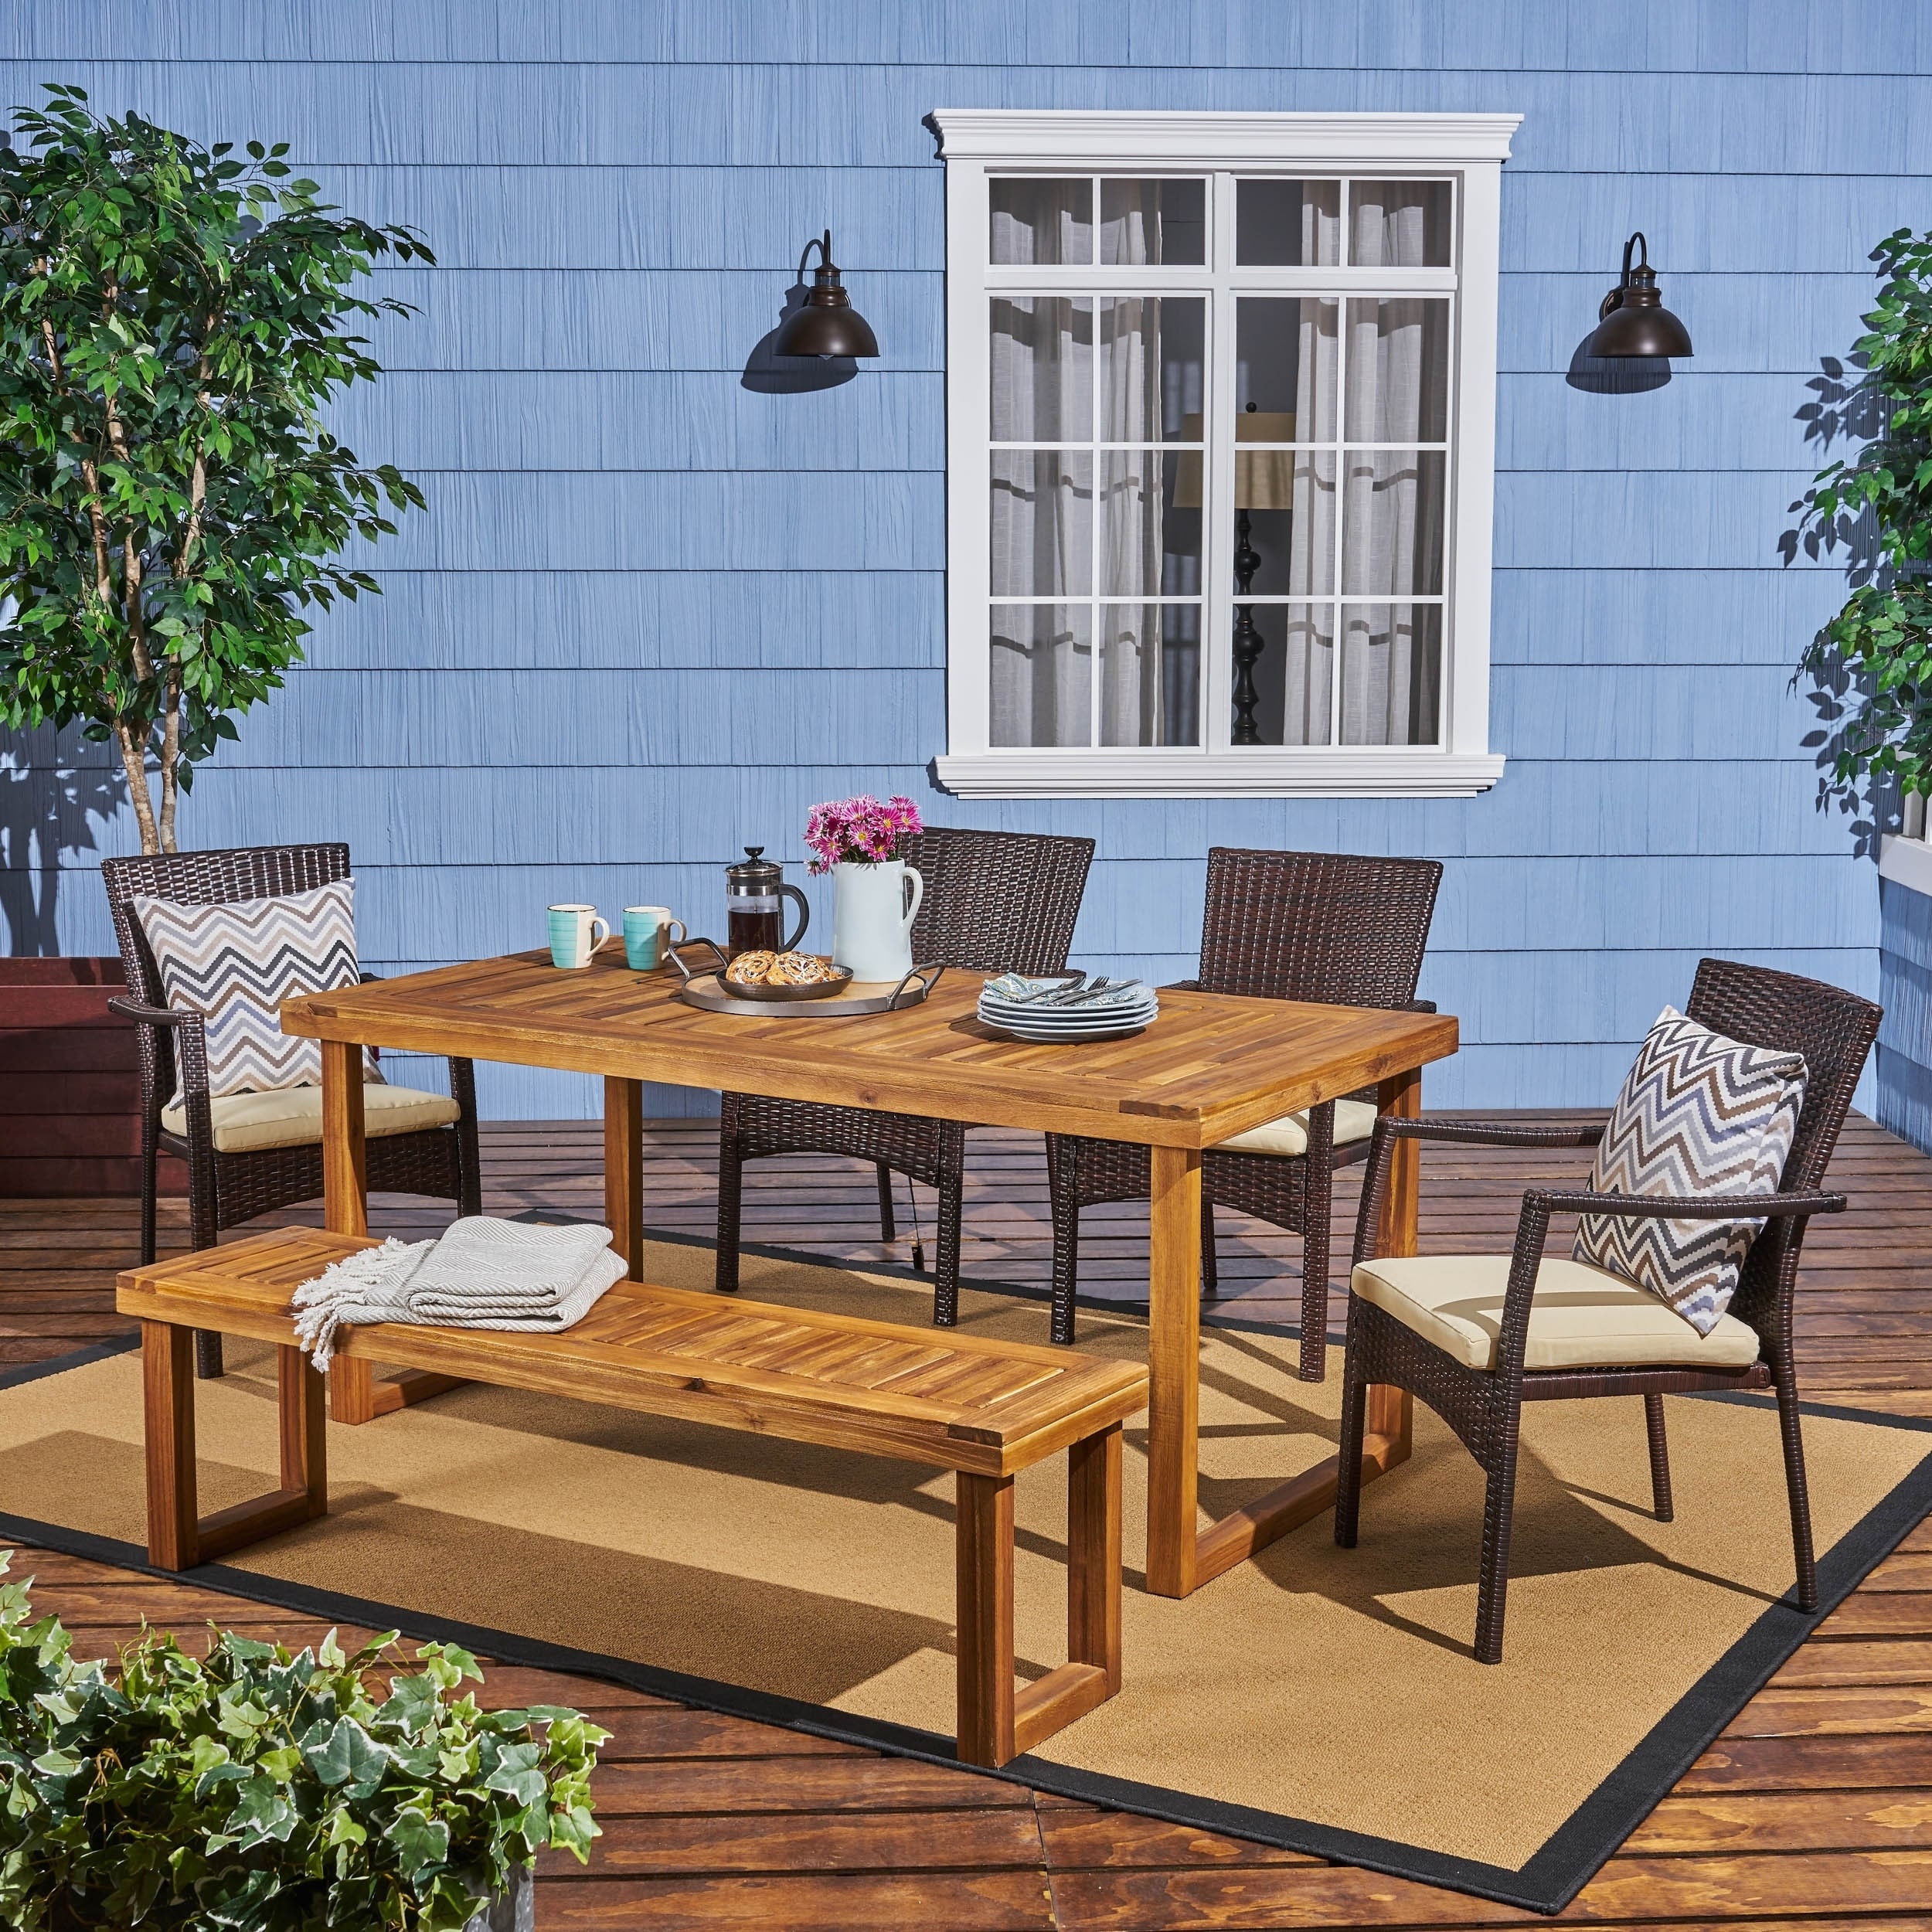 Garner Outdoor Aluminum Dining Set With Wicker Chairs And Bench